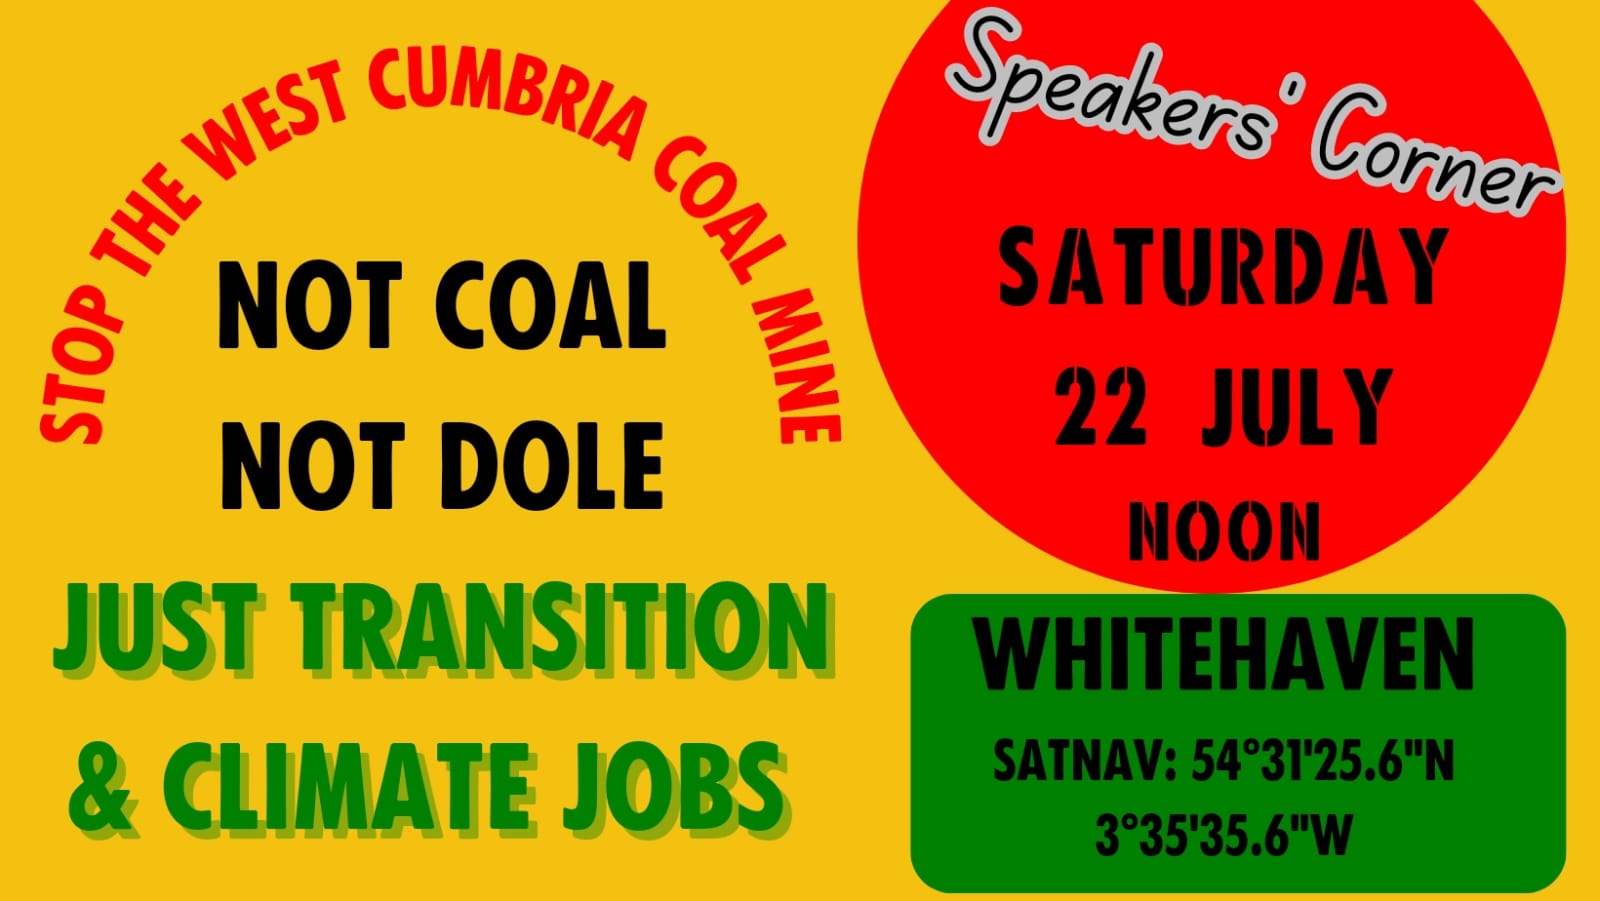 Welcome to West Cumbria Mining